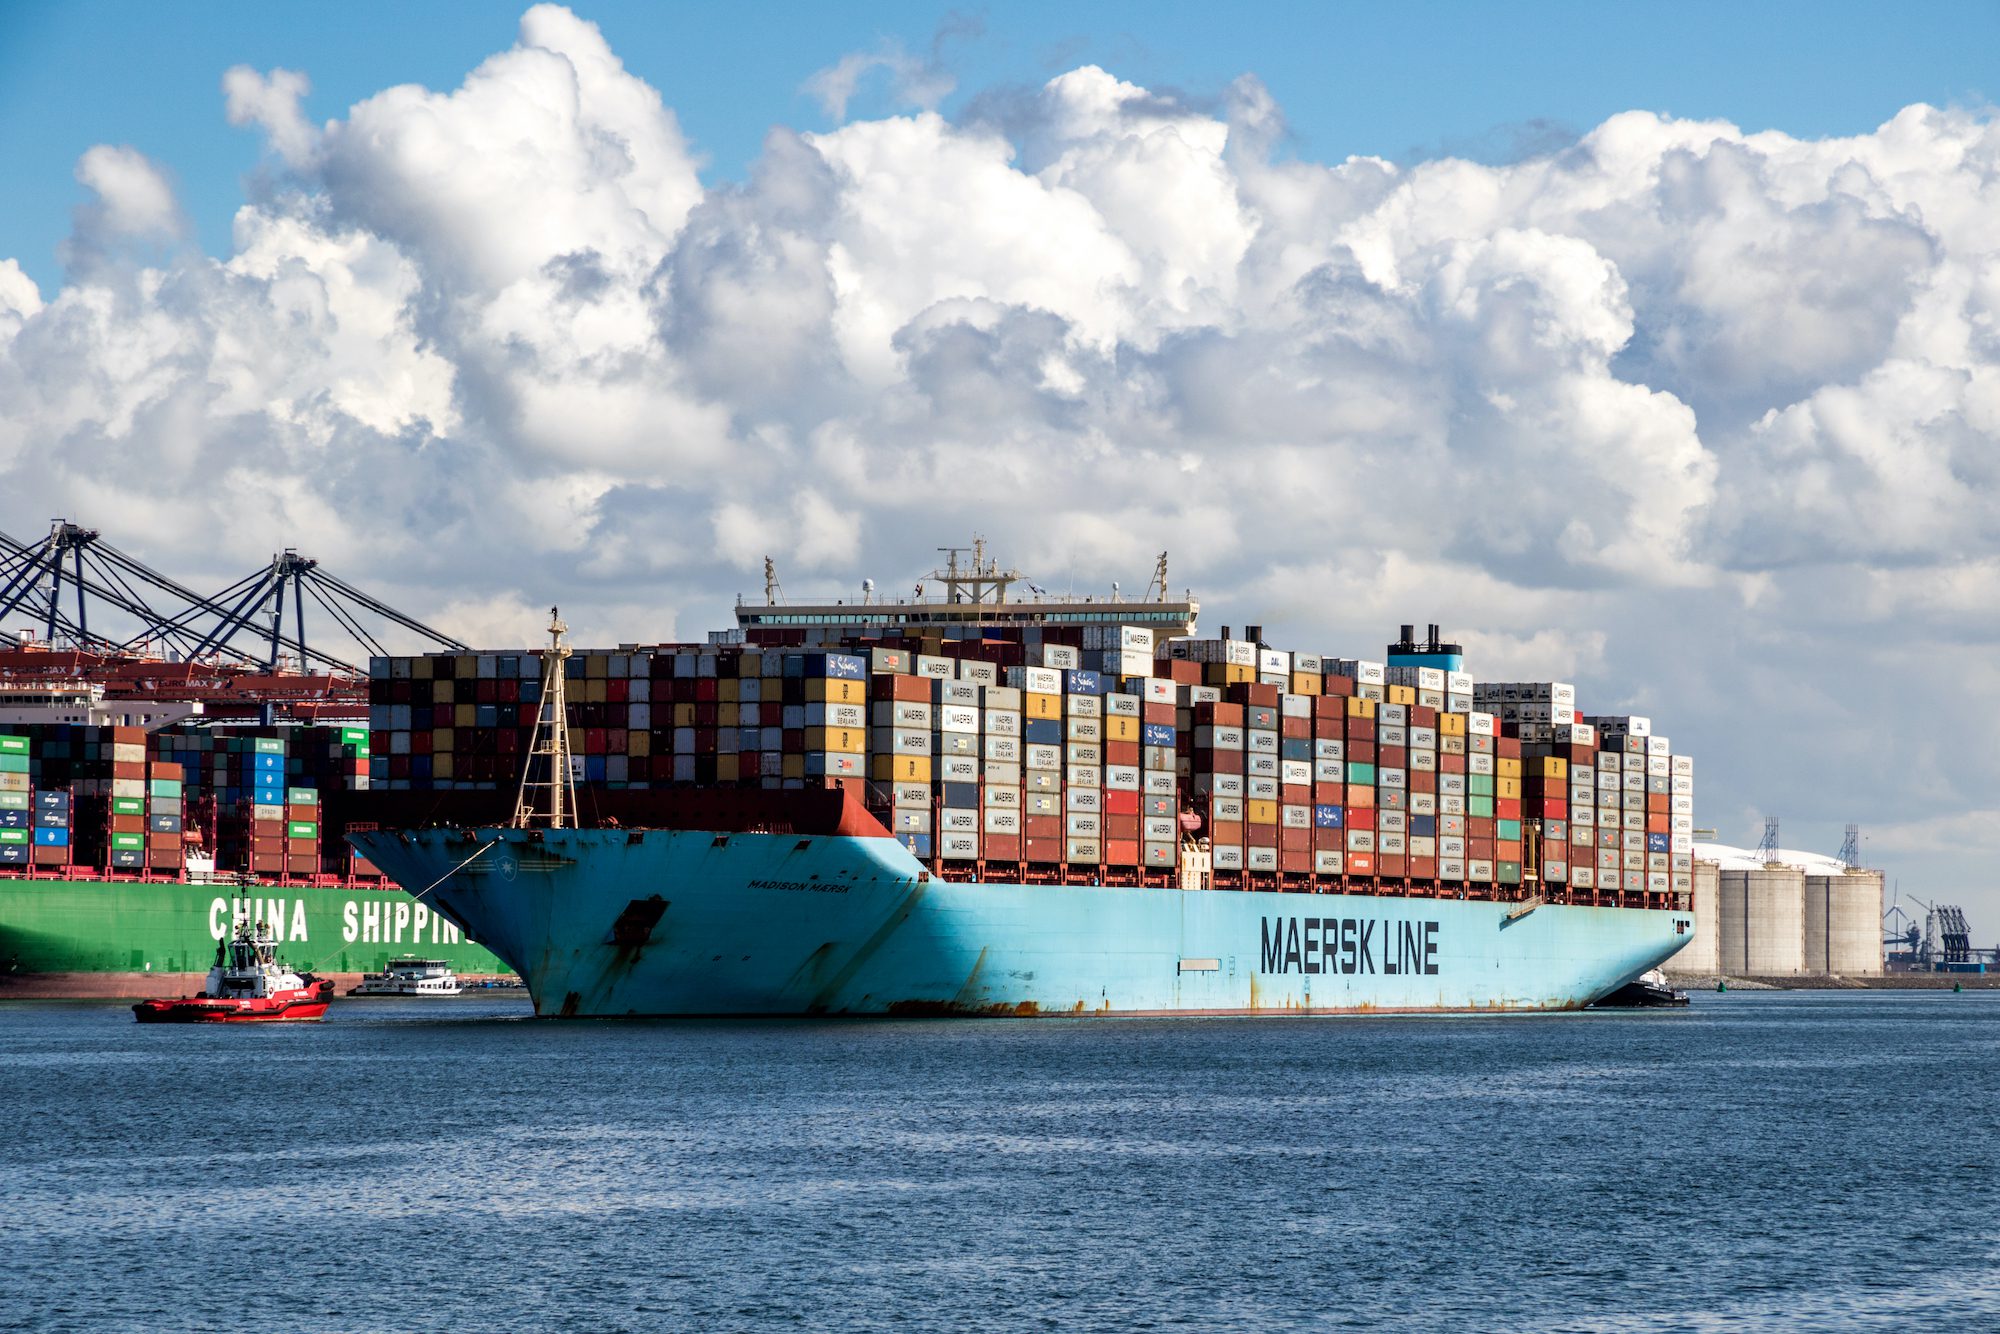 Maersk Gives Overstocked Retailers the Option to Slow Arrivals